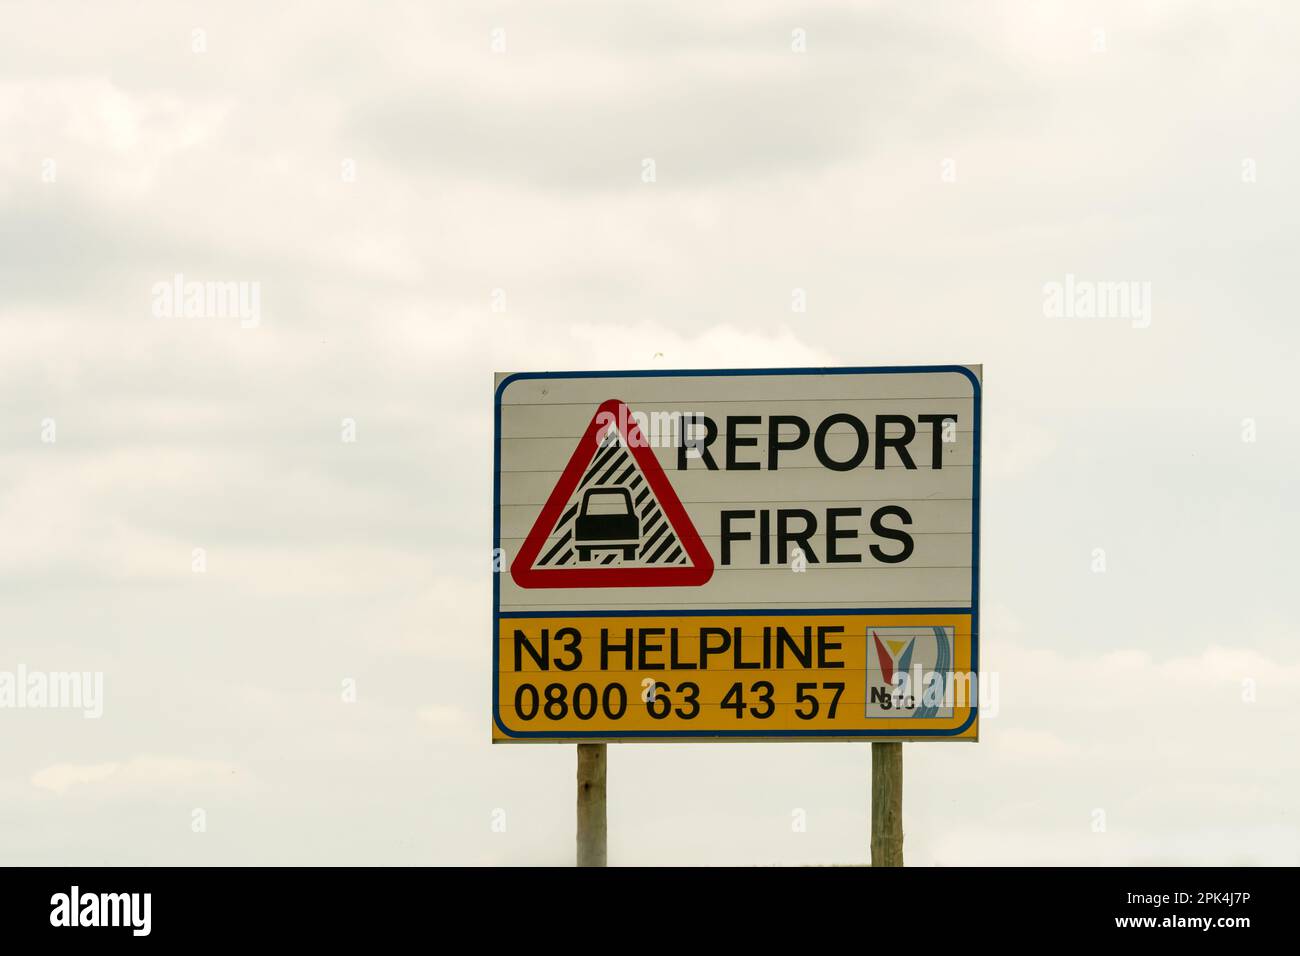 road sign or signage to report fires and a helpline telephone number for the N3 highway in South Africa concept public awareness Stock Photo